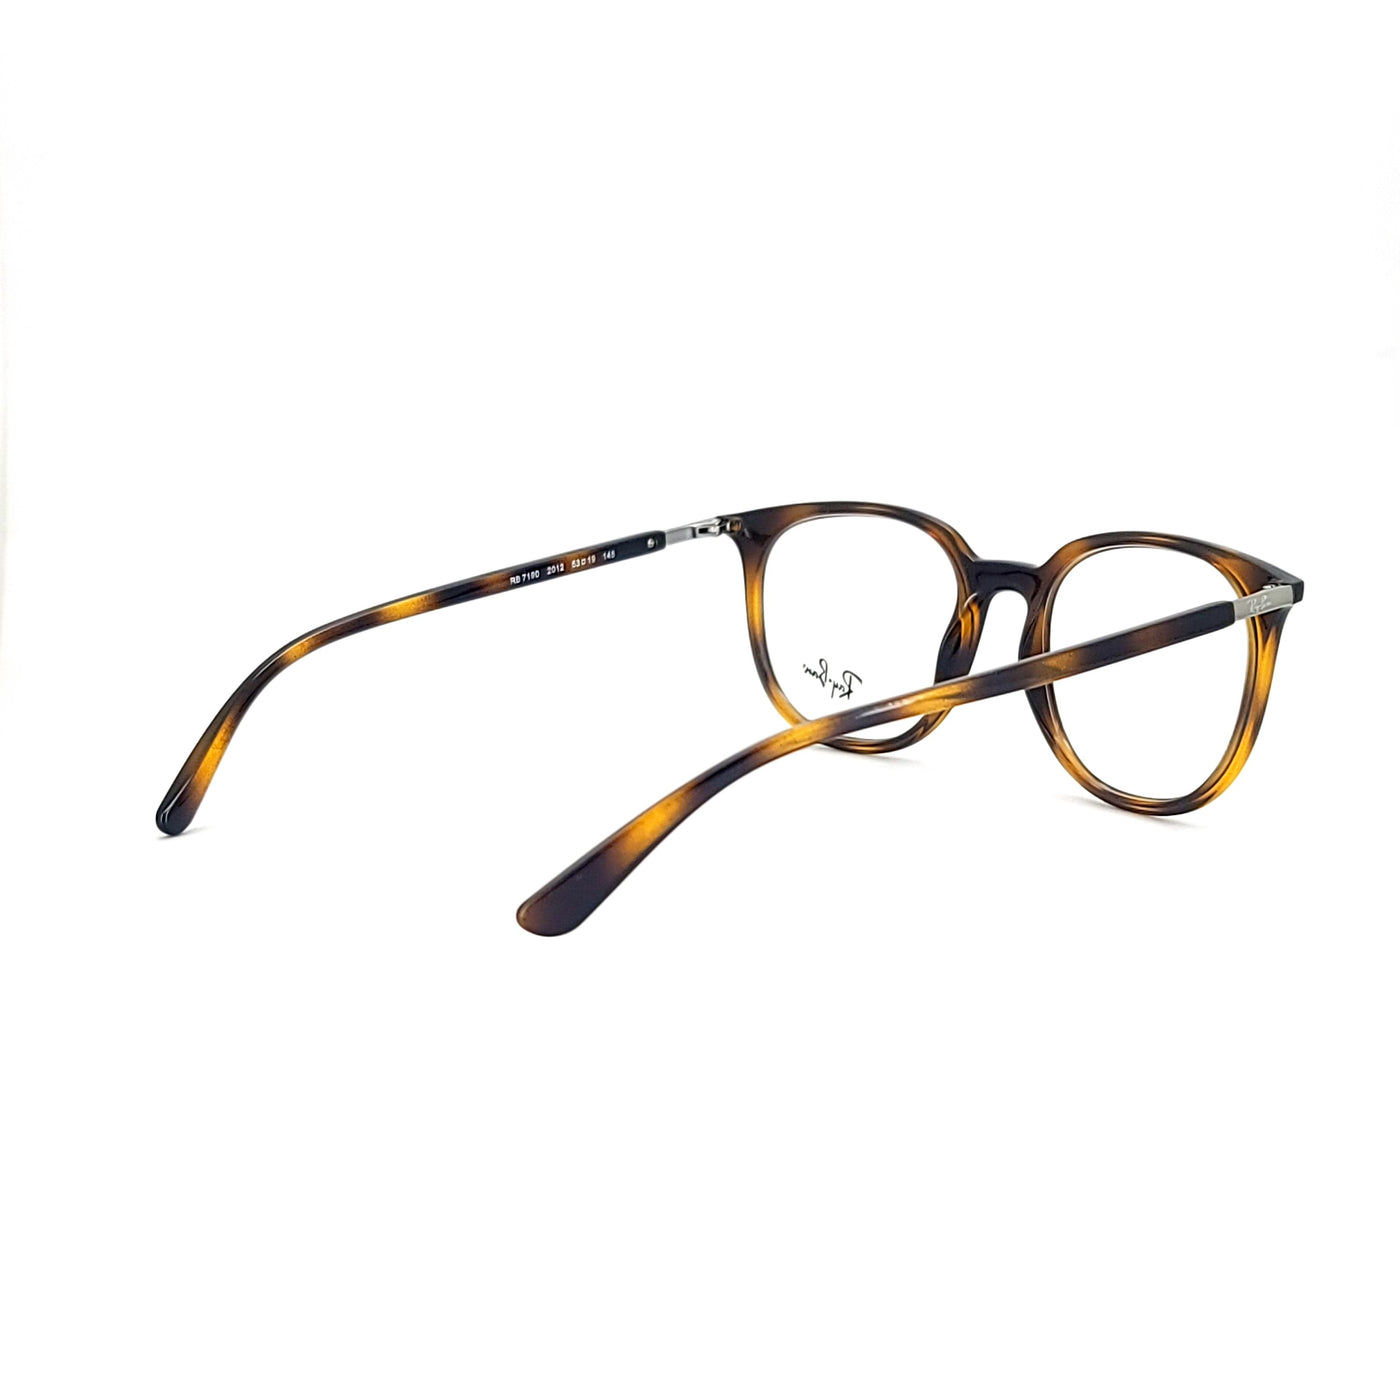 Ray-Ban Highstreet RB7190/2012_53 | Eyeglasses - Vision Express Optical Philippines